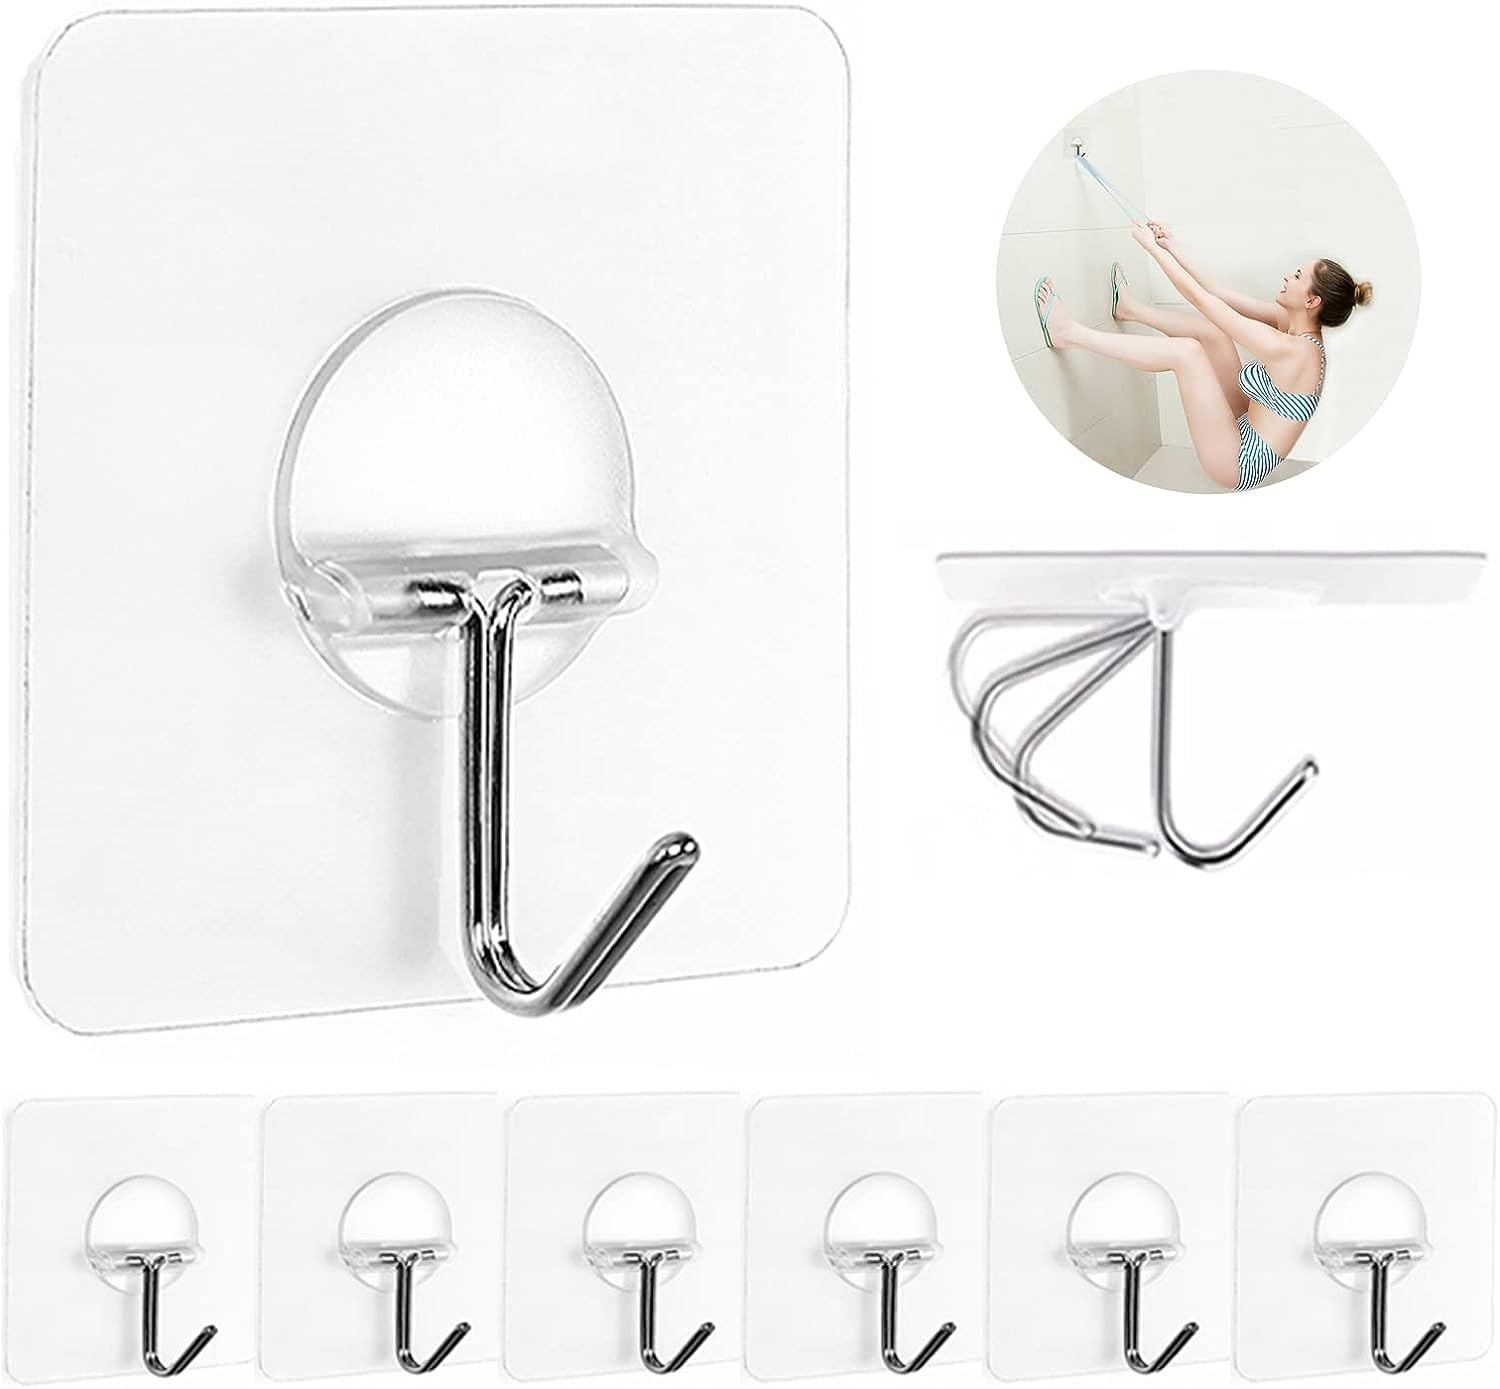 Inditradition Self Adhesive Steel Wall Hooks, 1 kg Load Capacity (3.5 x 1.5  cm, Silver) - Pack of 12, Random Design : : Home & Kitchen